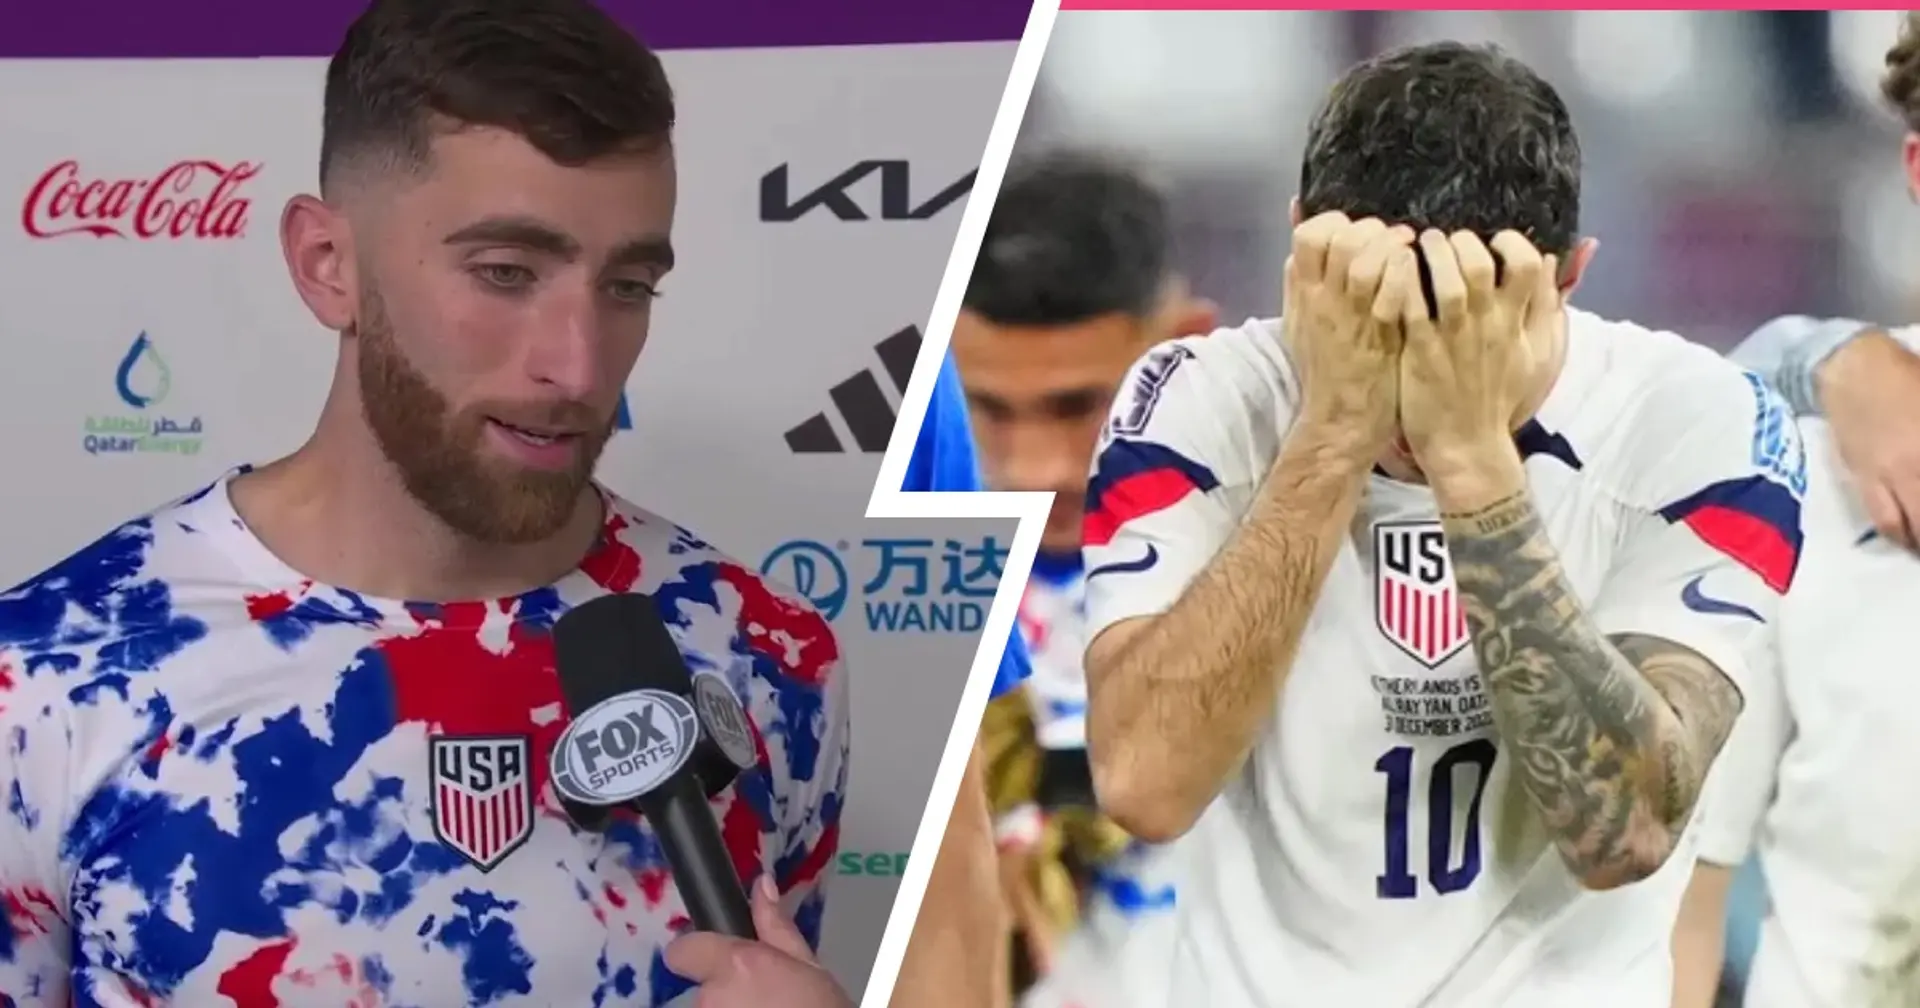 'It is a somber mood': Emotional Turner reacts to USA World Cup exit